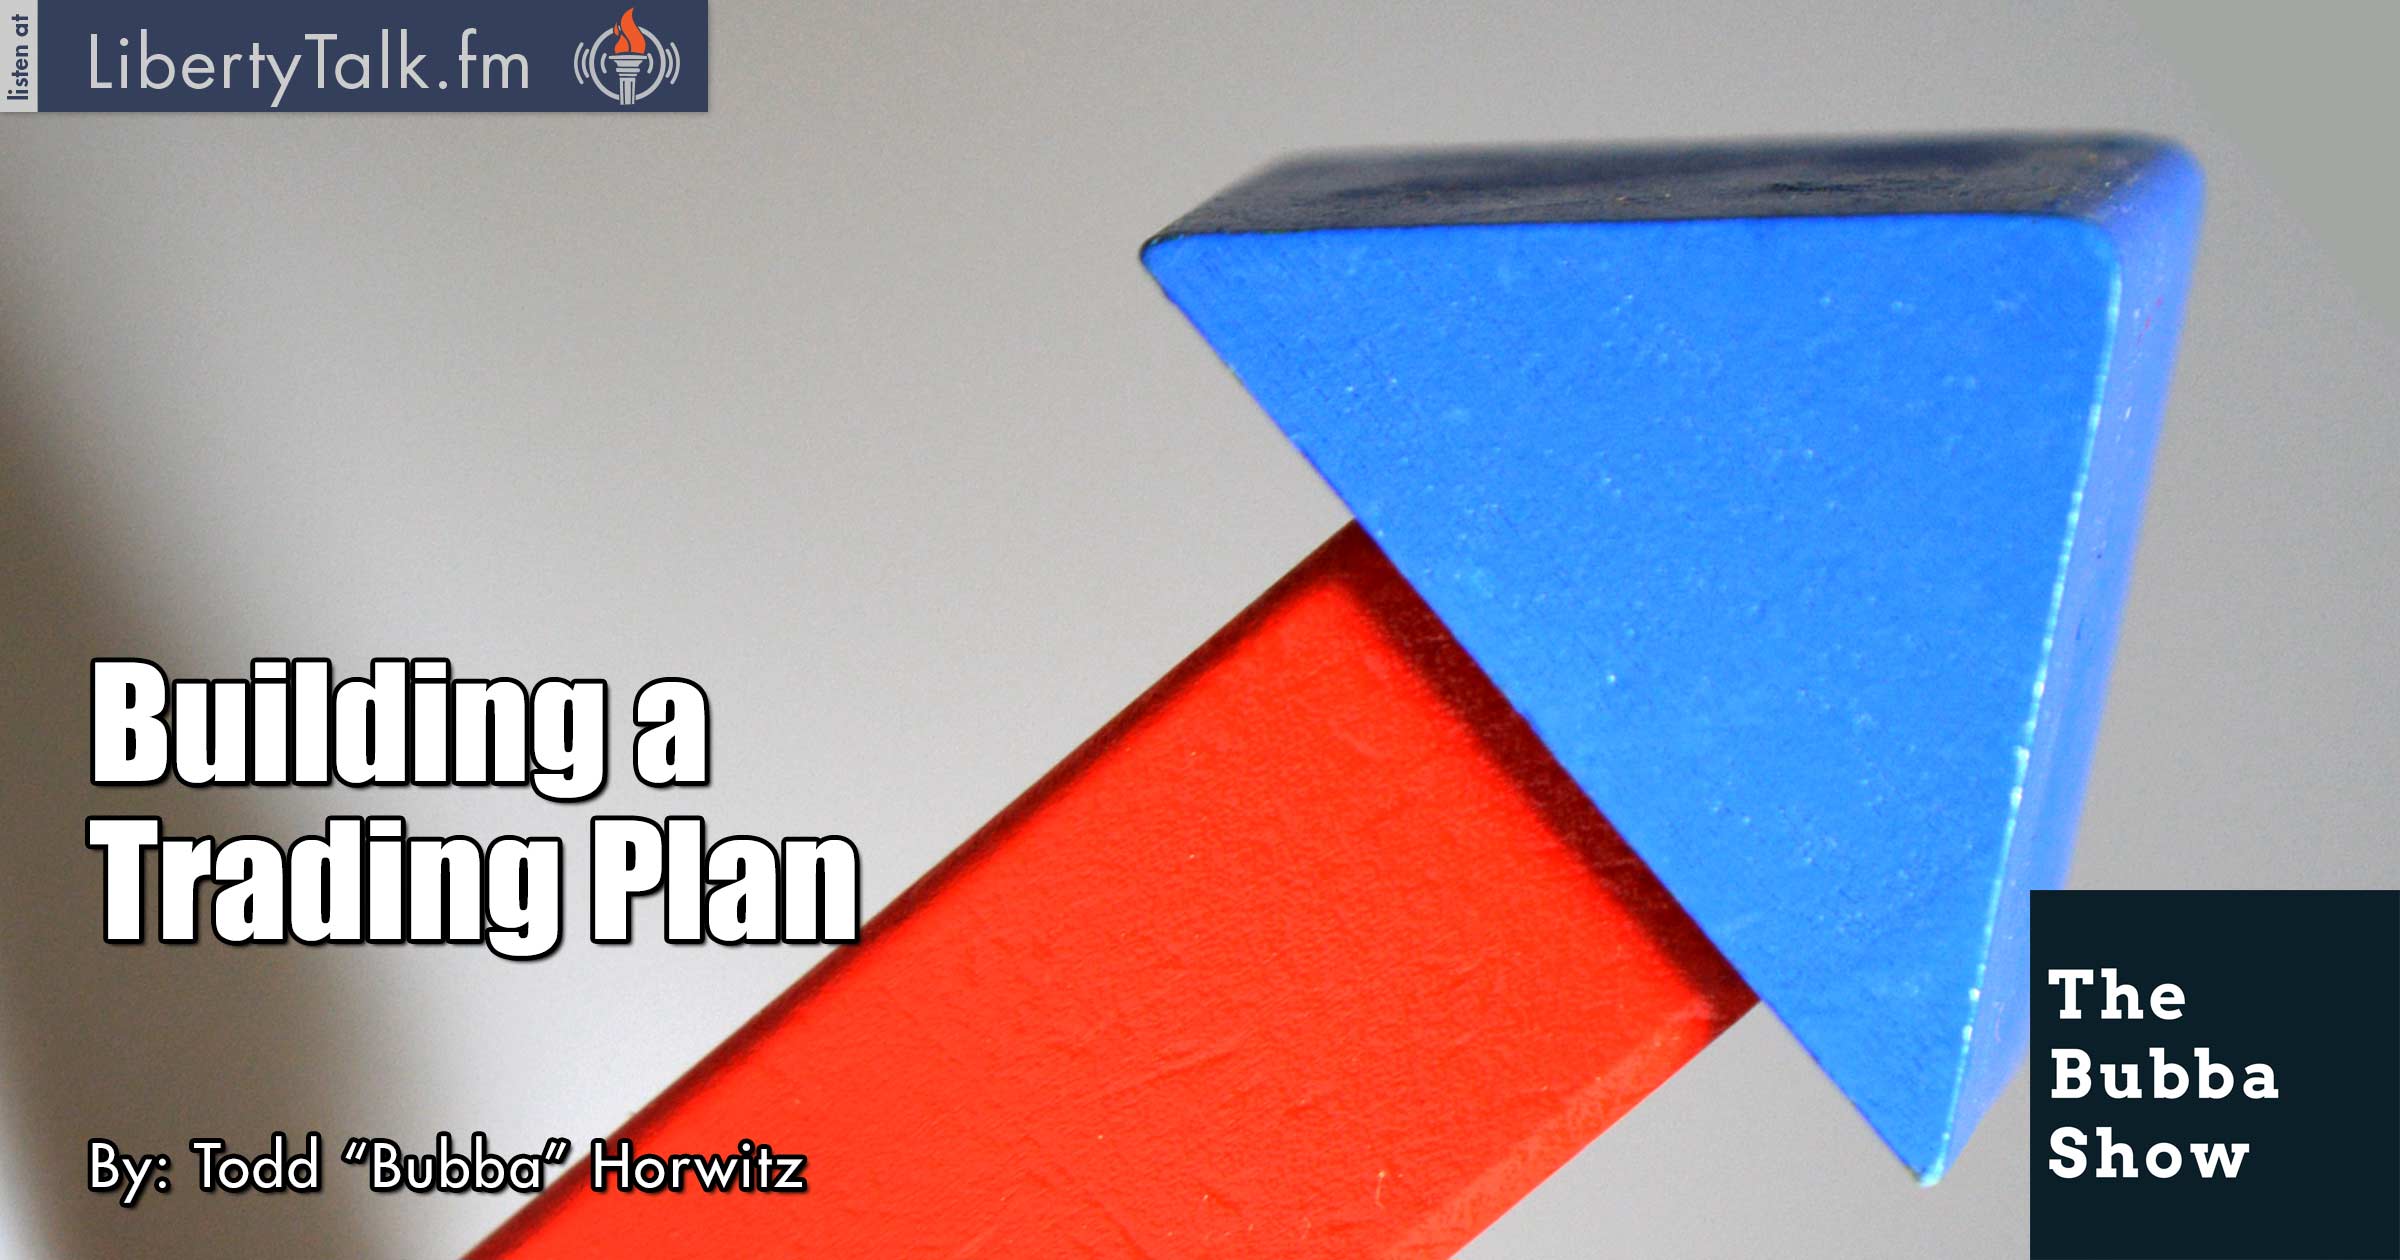 Building a Trading Plan - The Bubba Show